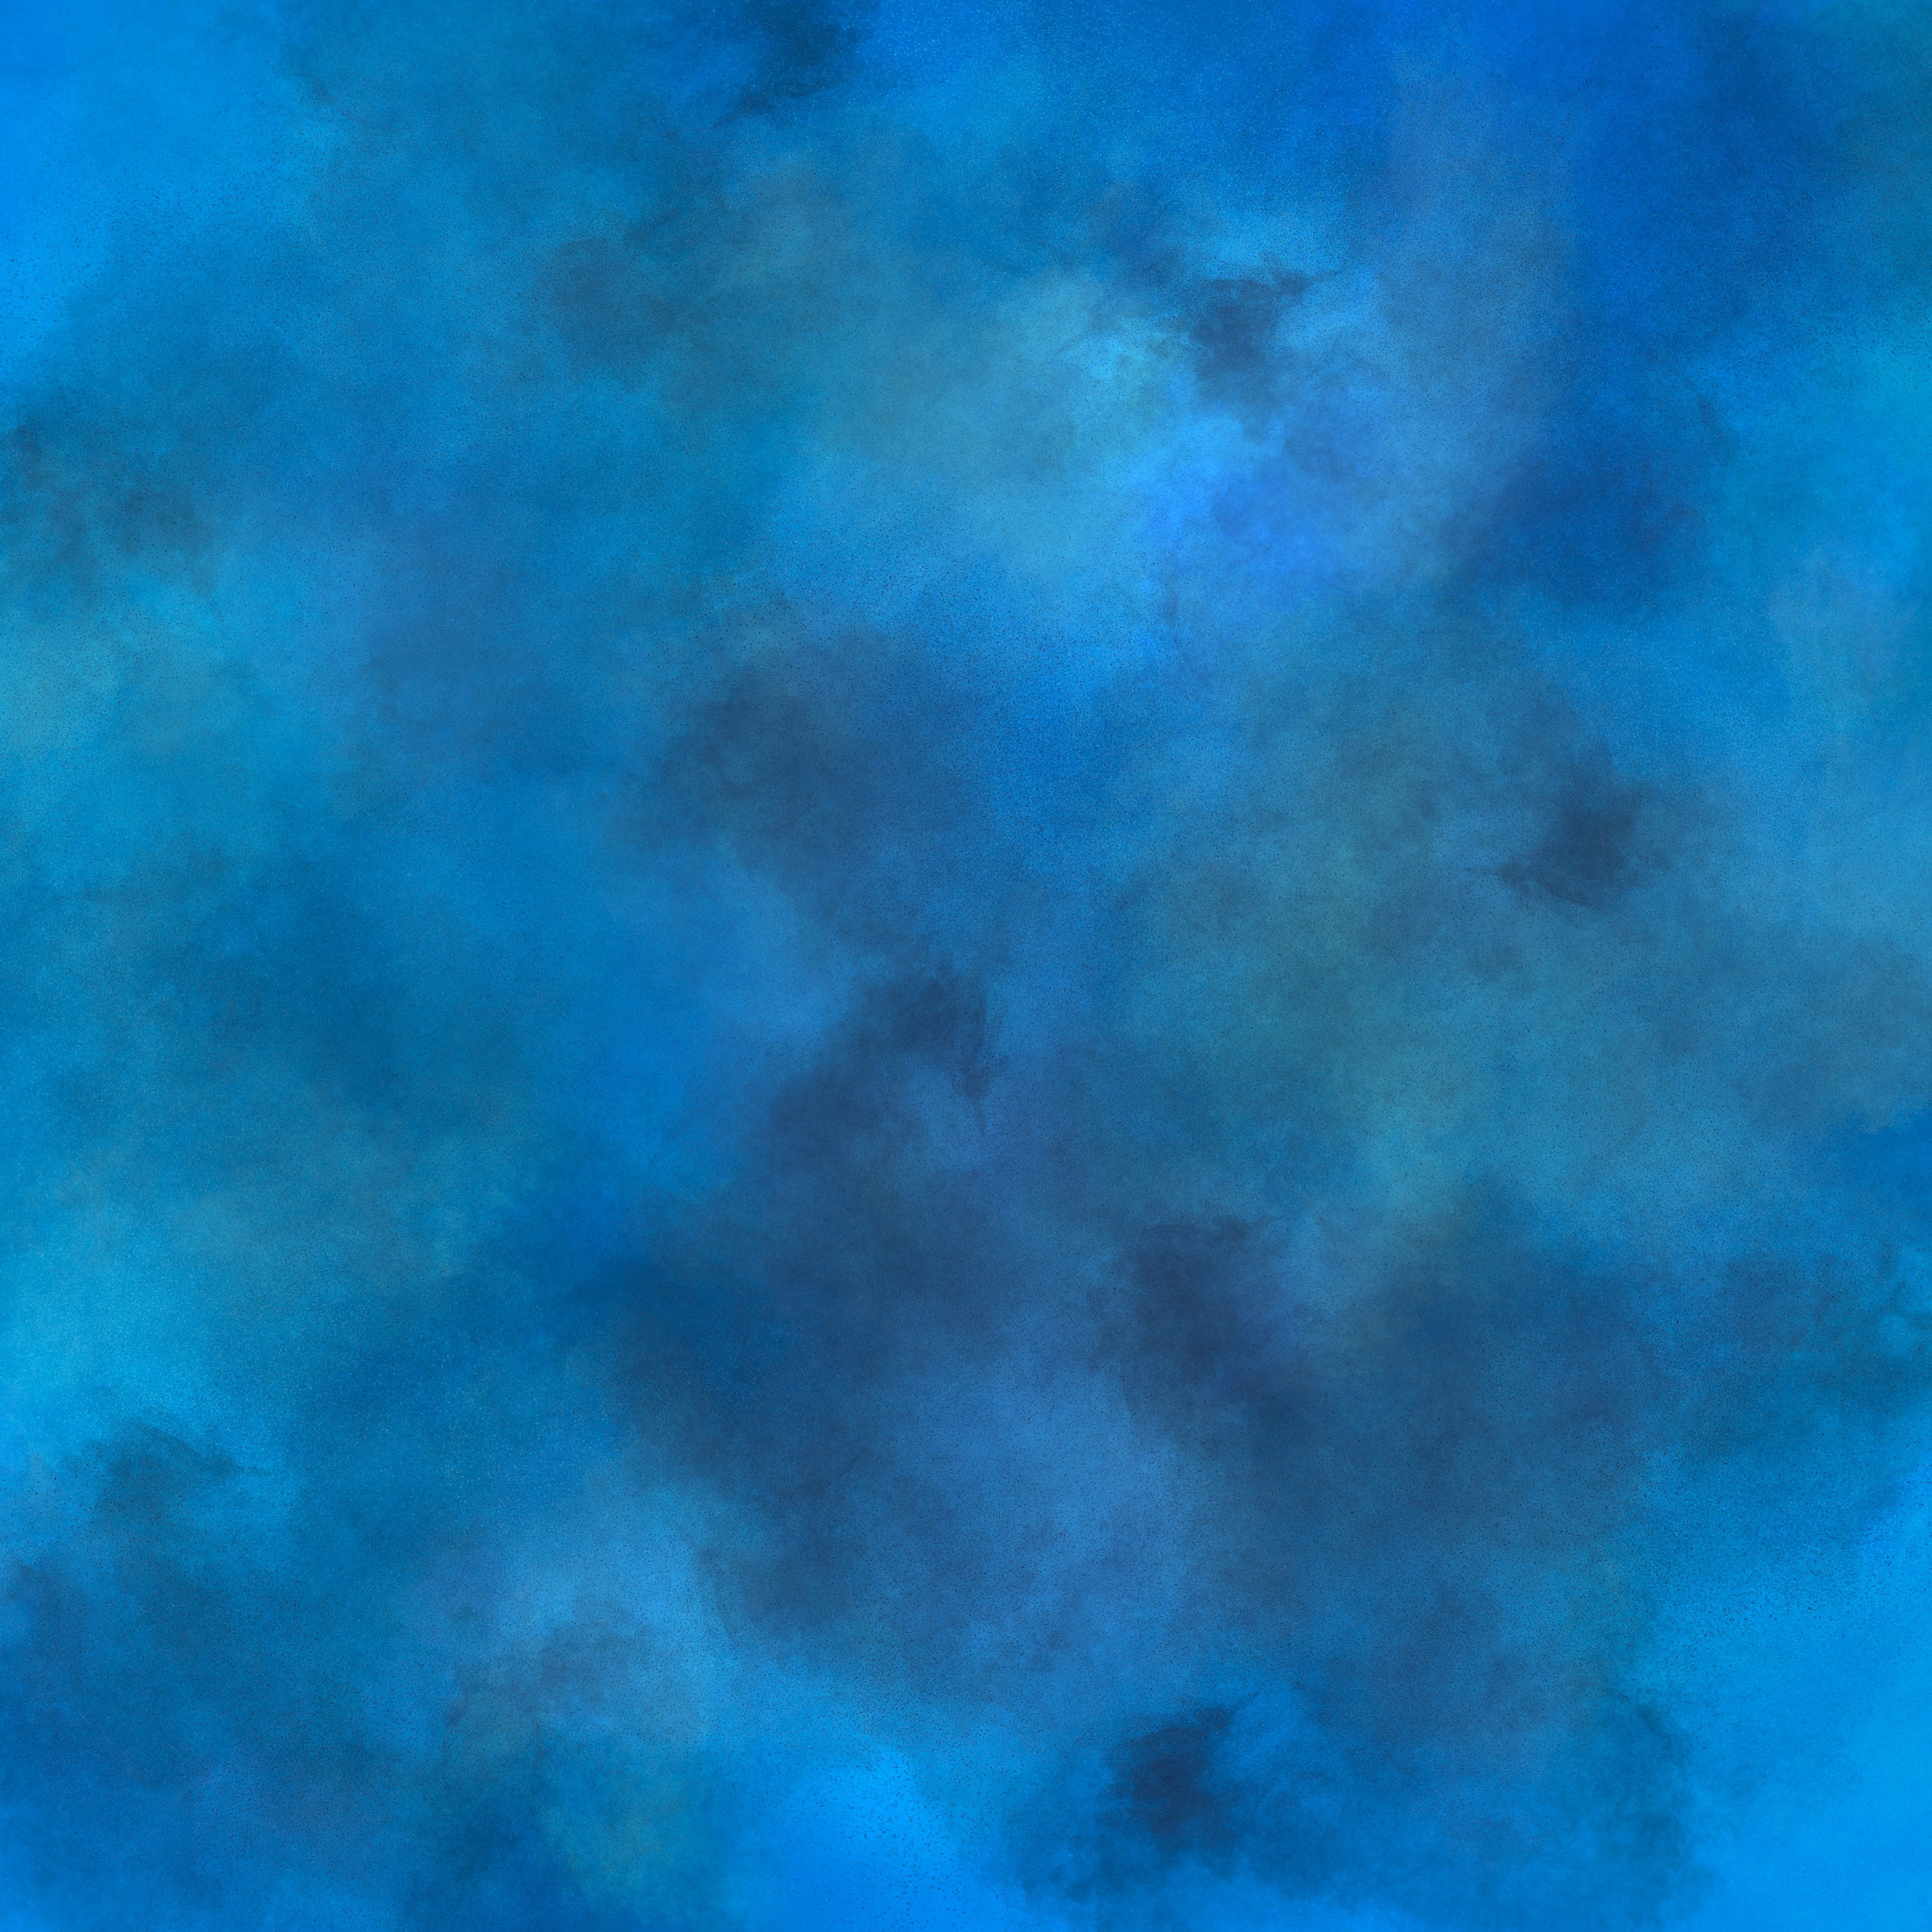 Blue Watercolor Stain Background 